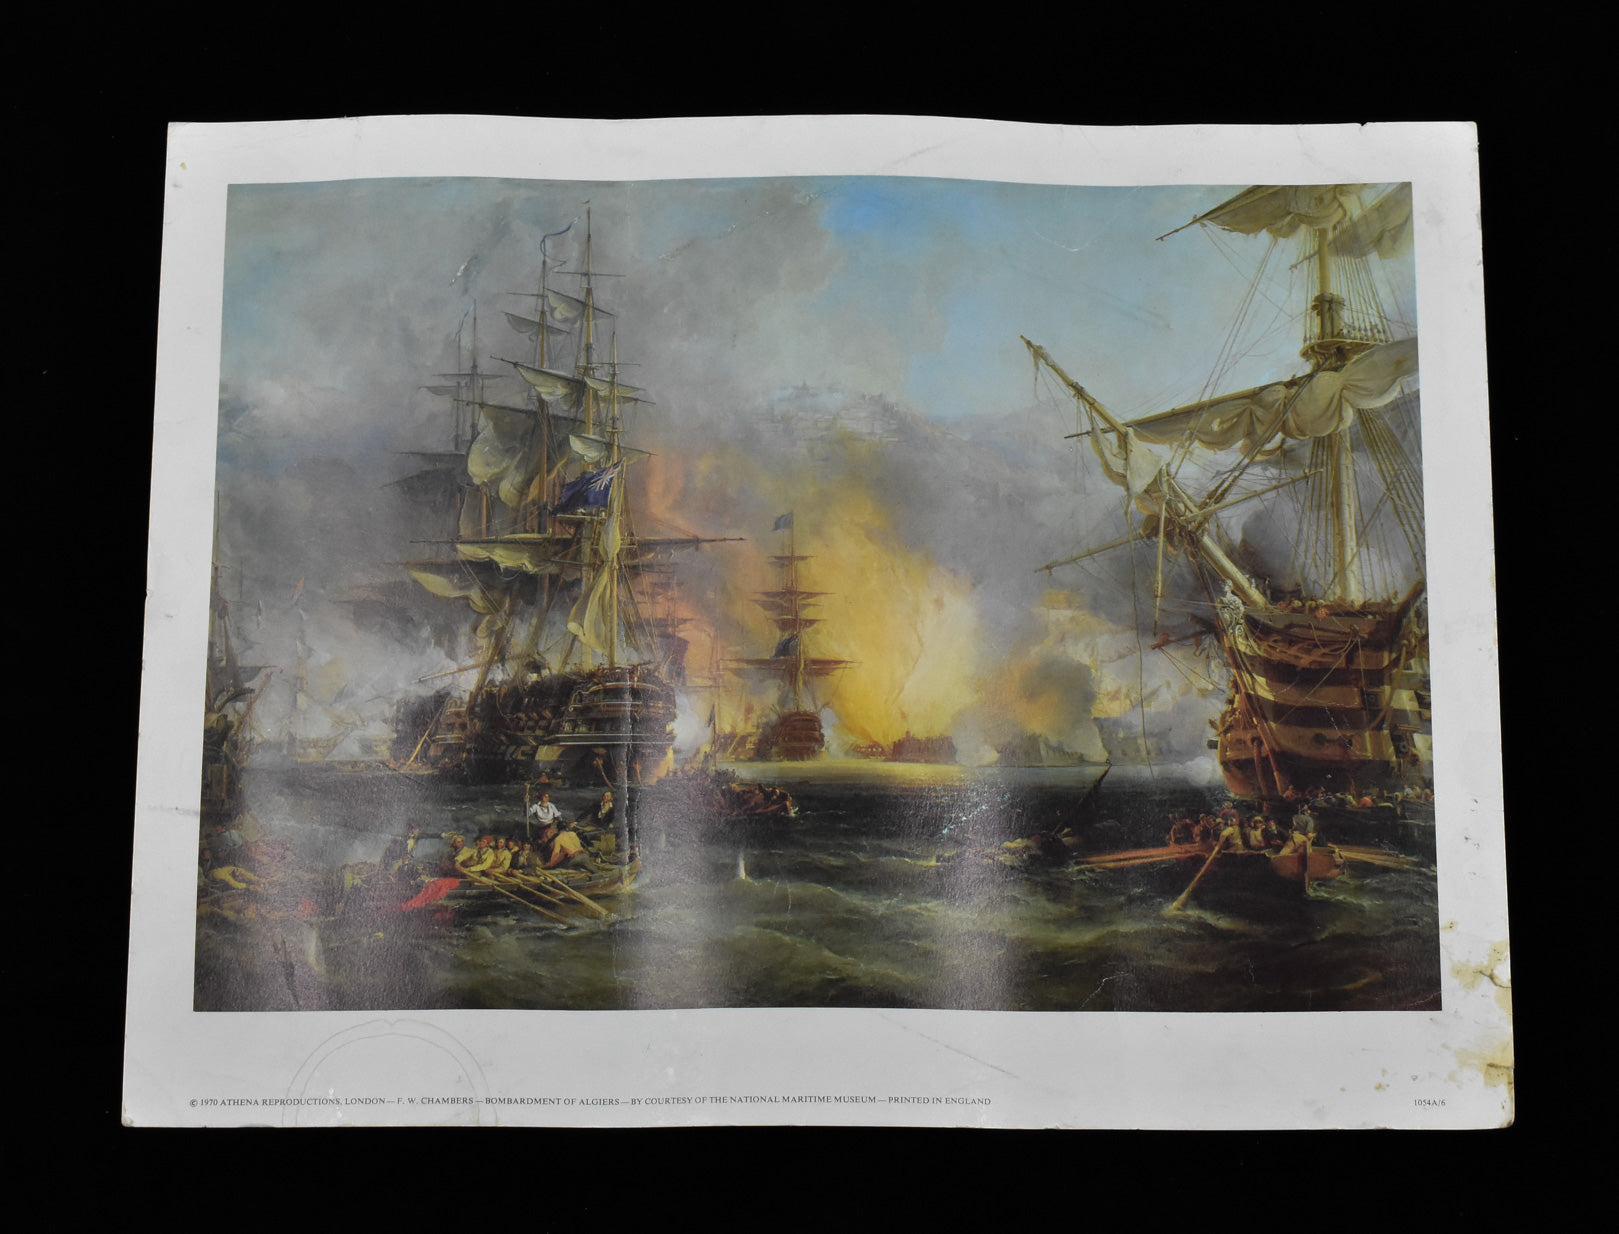 Bombardment of Algiers 1816 by George Chambers War Art Repro Damaged Reprint